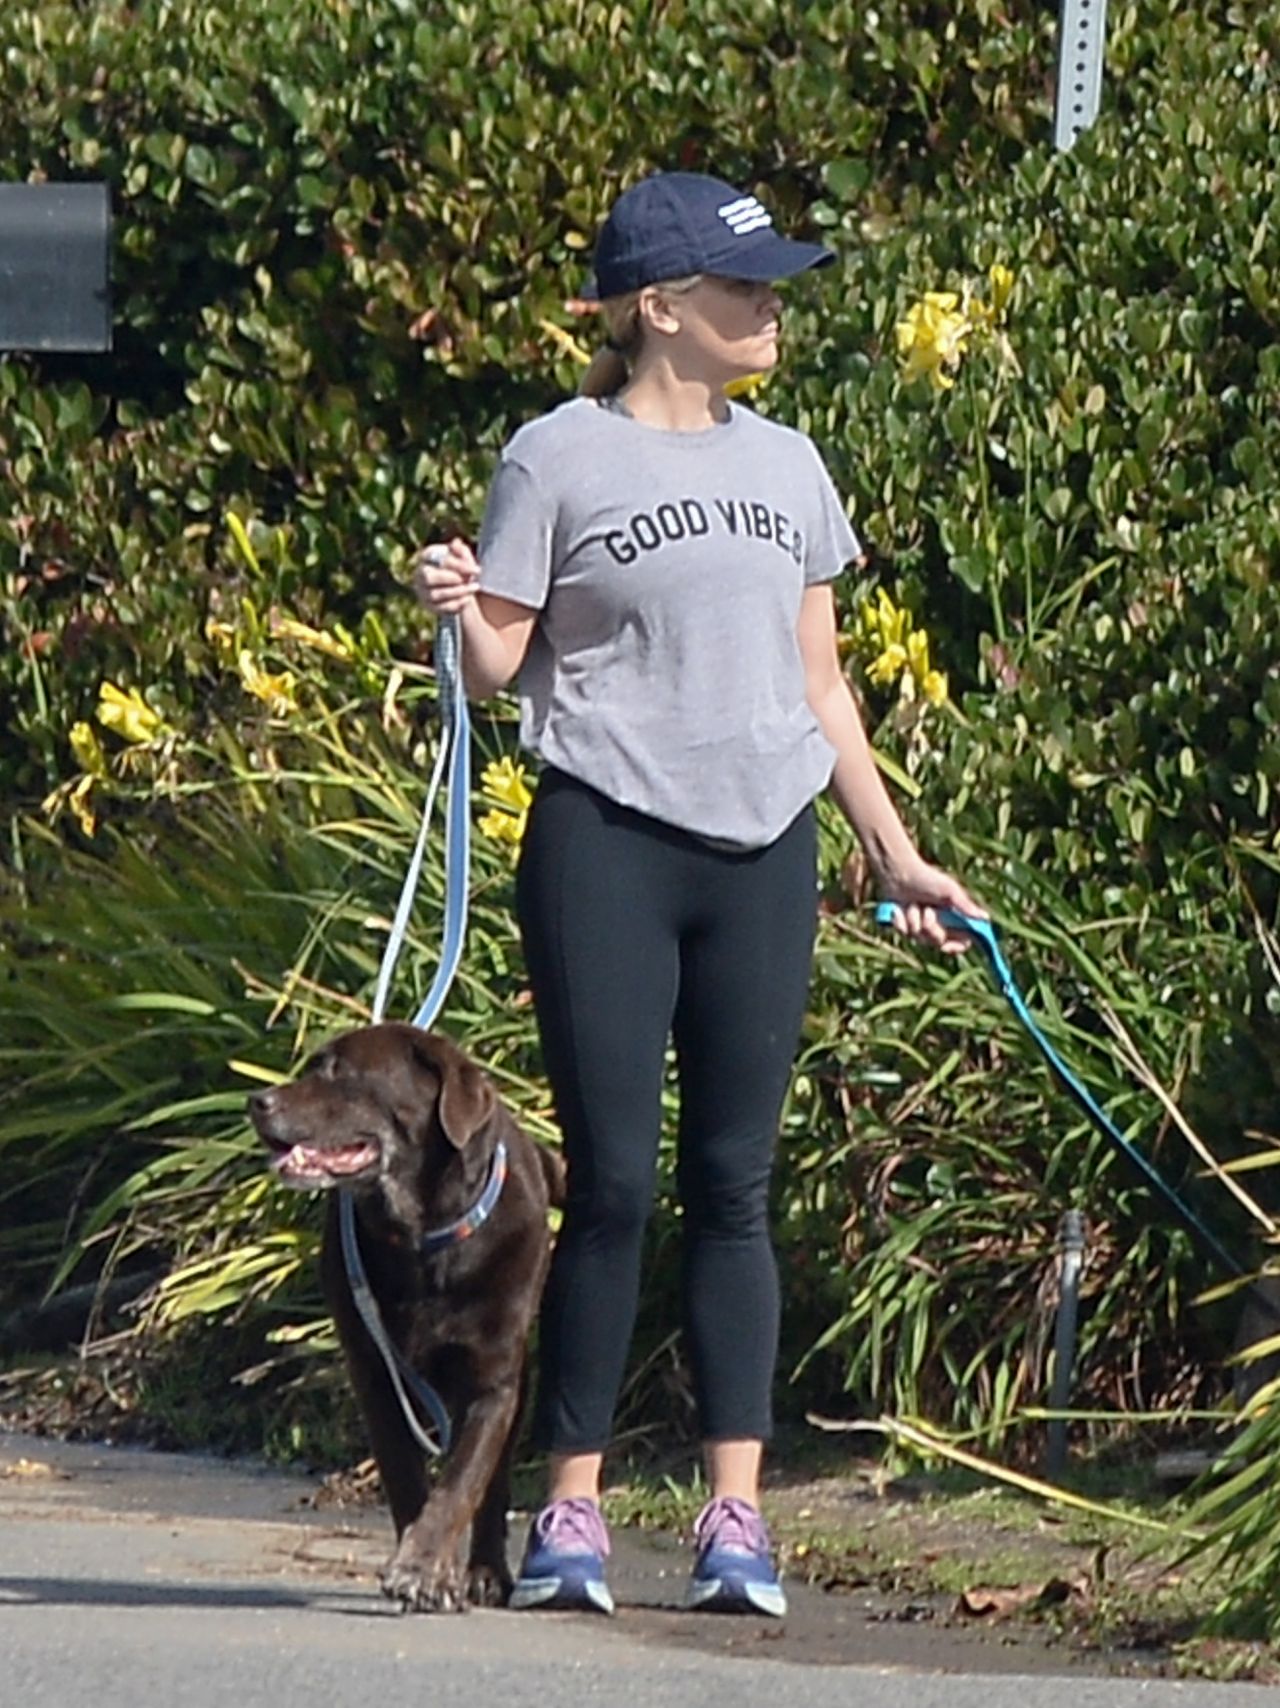 reese-witherspoon-taking-her-dogs-out-for-a-walk-10-29-2018-0.jpg